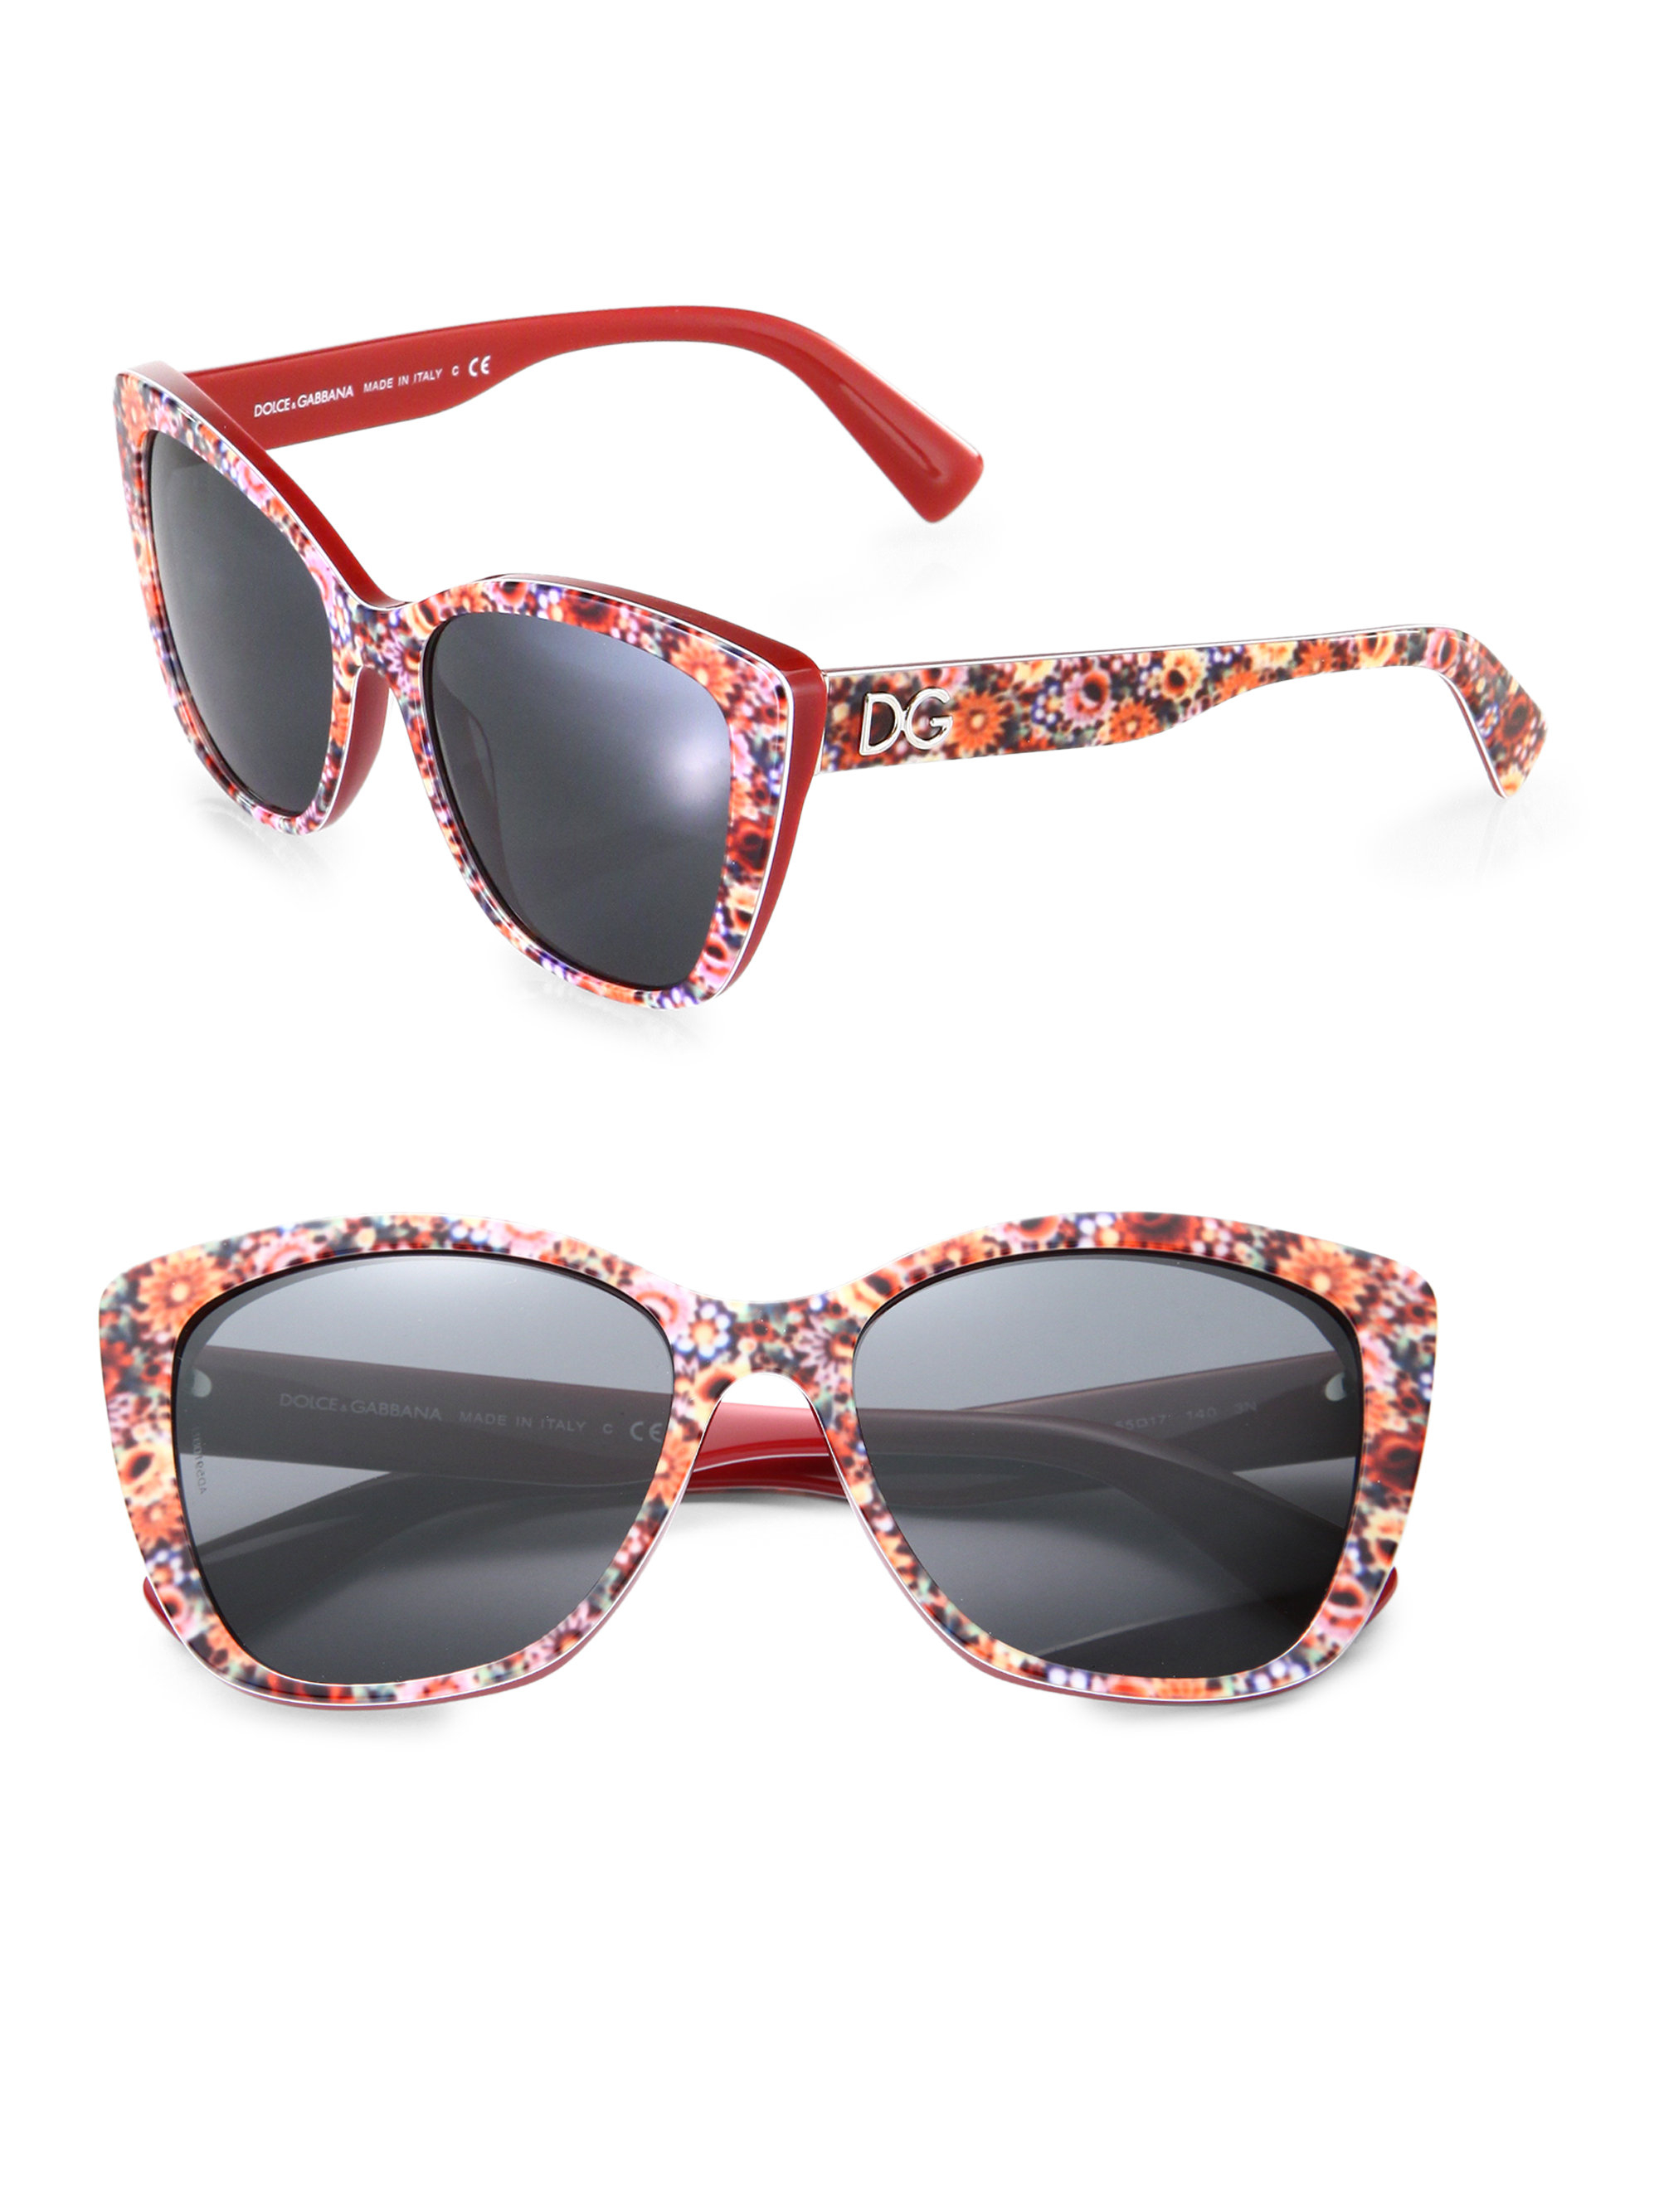 Dolce & Gabbana Floralprinted Modified Catseye Sunglasses in Red - Lyst